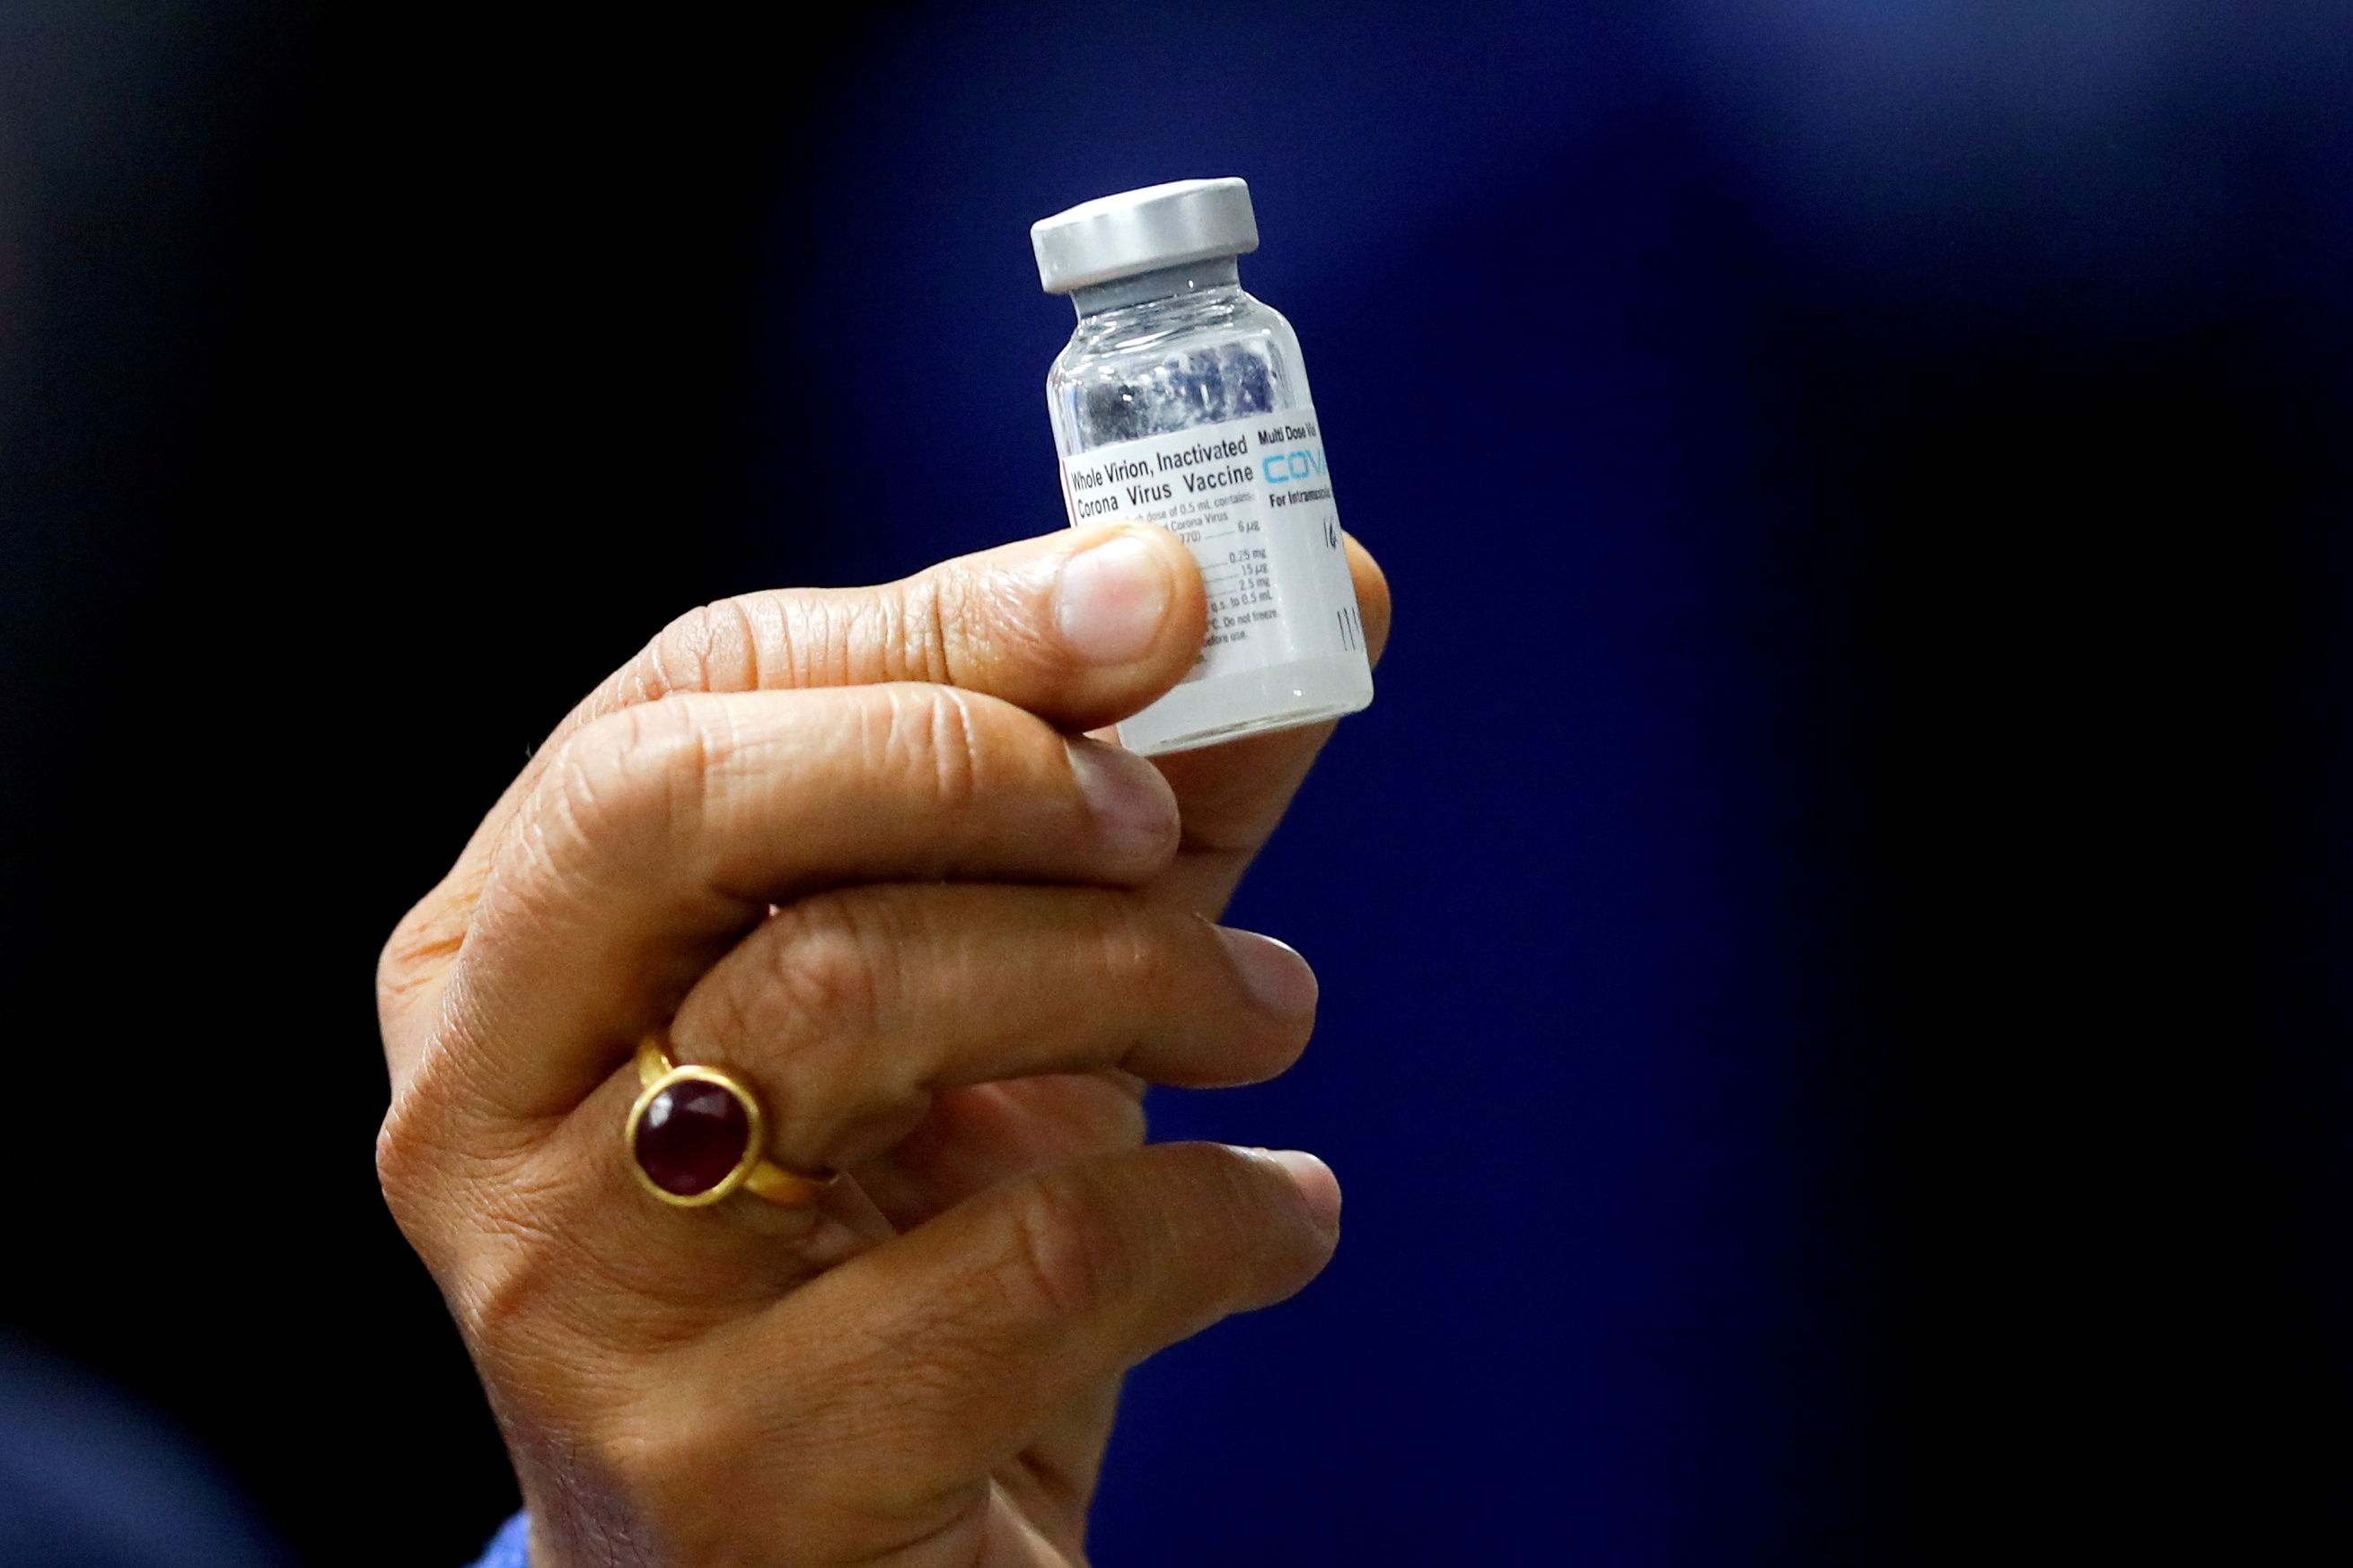 Indian Health Minister Harsh Vardhan holds a dose of Bharat Biotech's COVID-19 vaccine called COVAXIN, during a vaccination campaign at All India Institute of Medical Sciences (AIIMS) hospital in New Delhi, India, January 16, 2021. REUTERS/Adnan Abidi